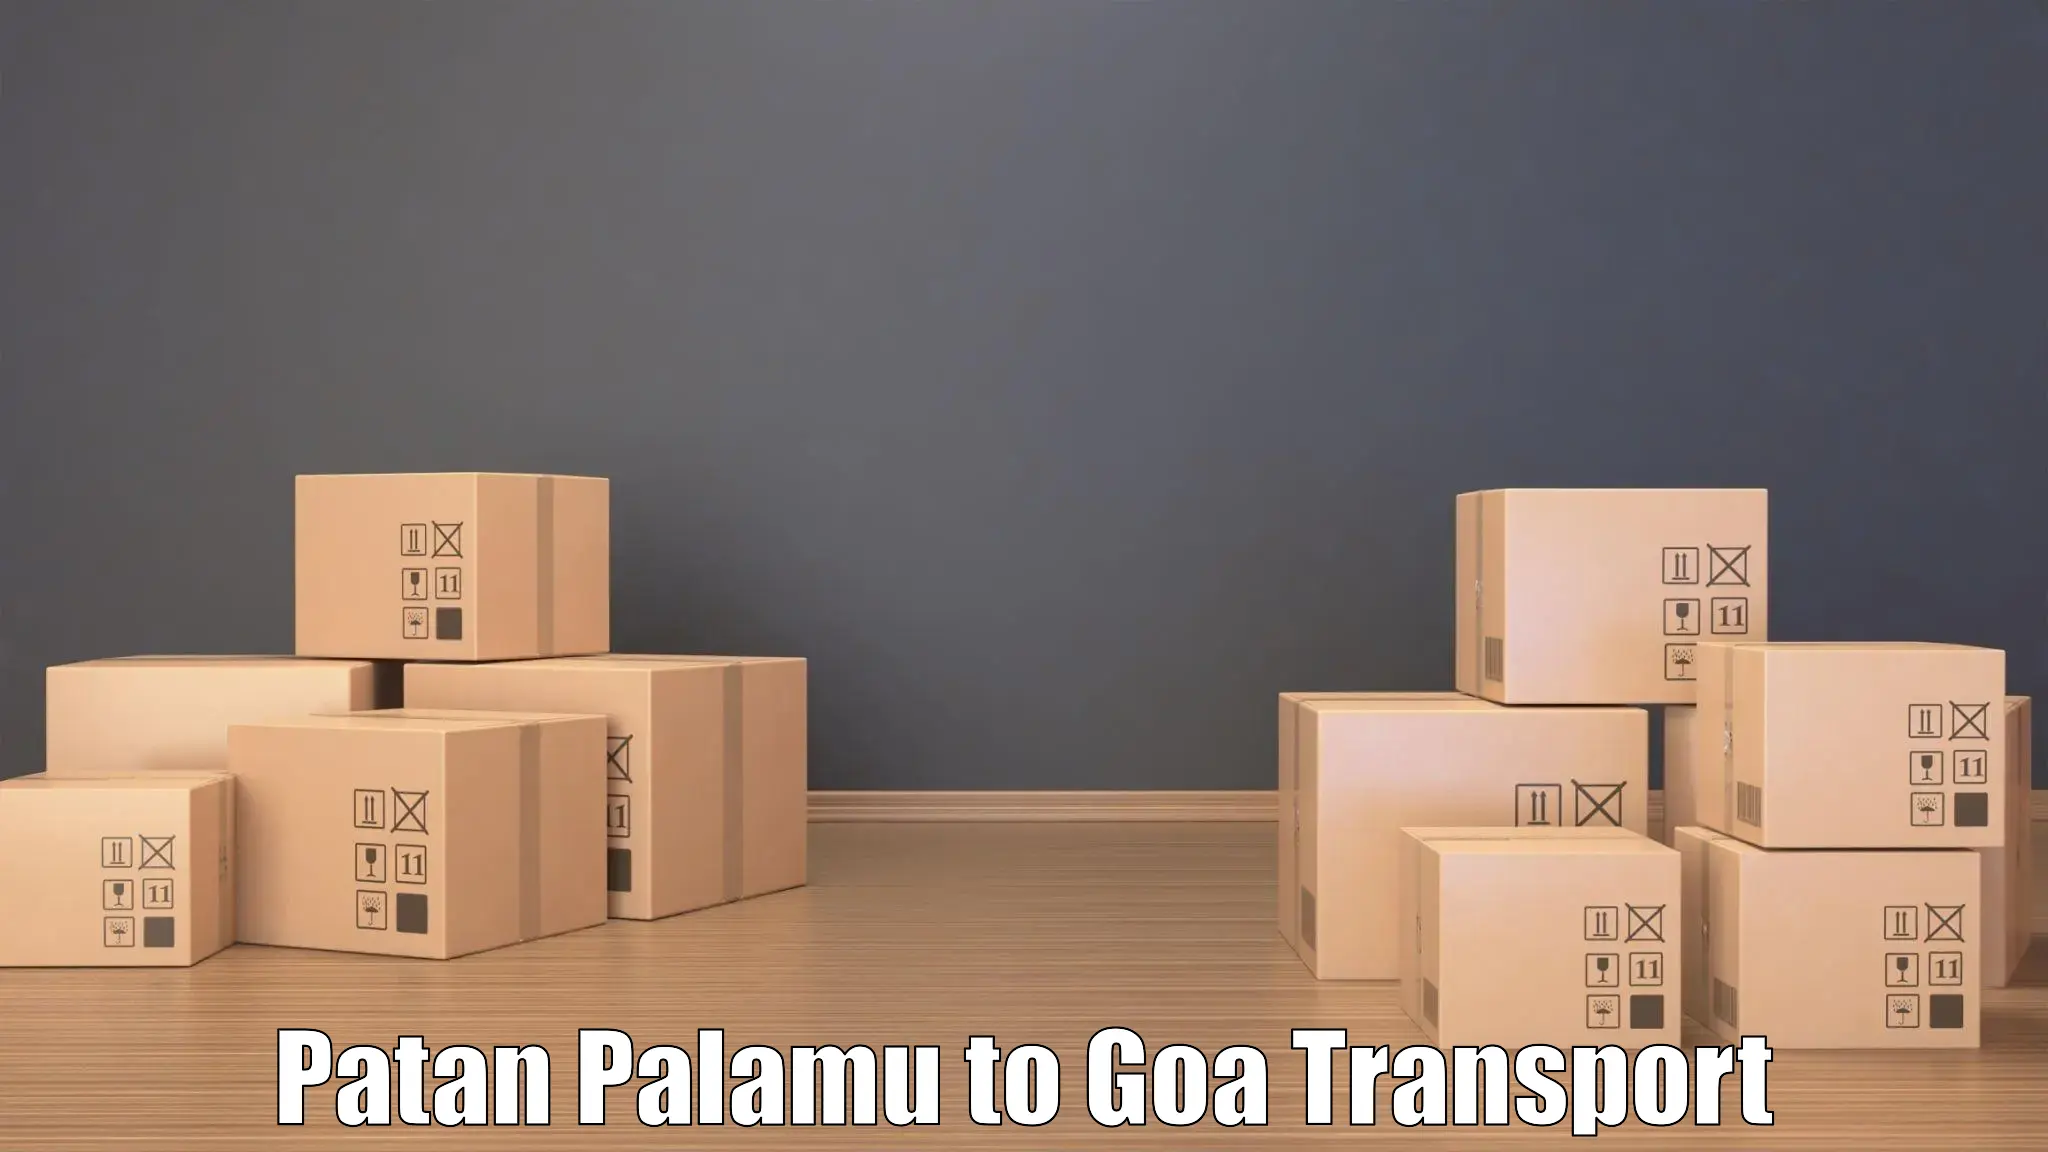 Transport bike from one state to another Patan Palamu to South Goa